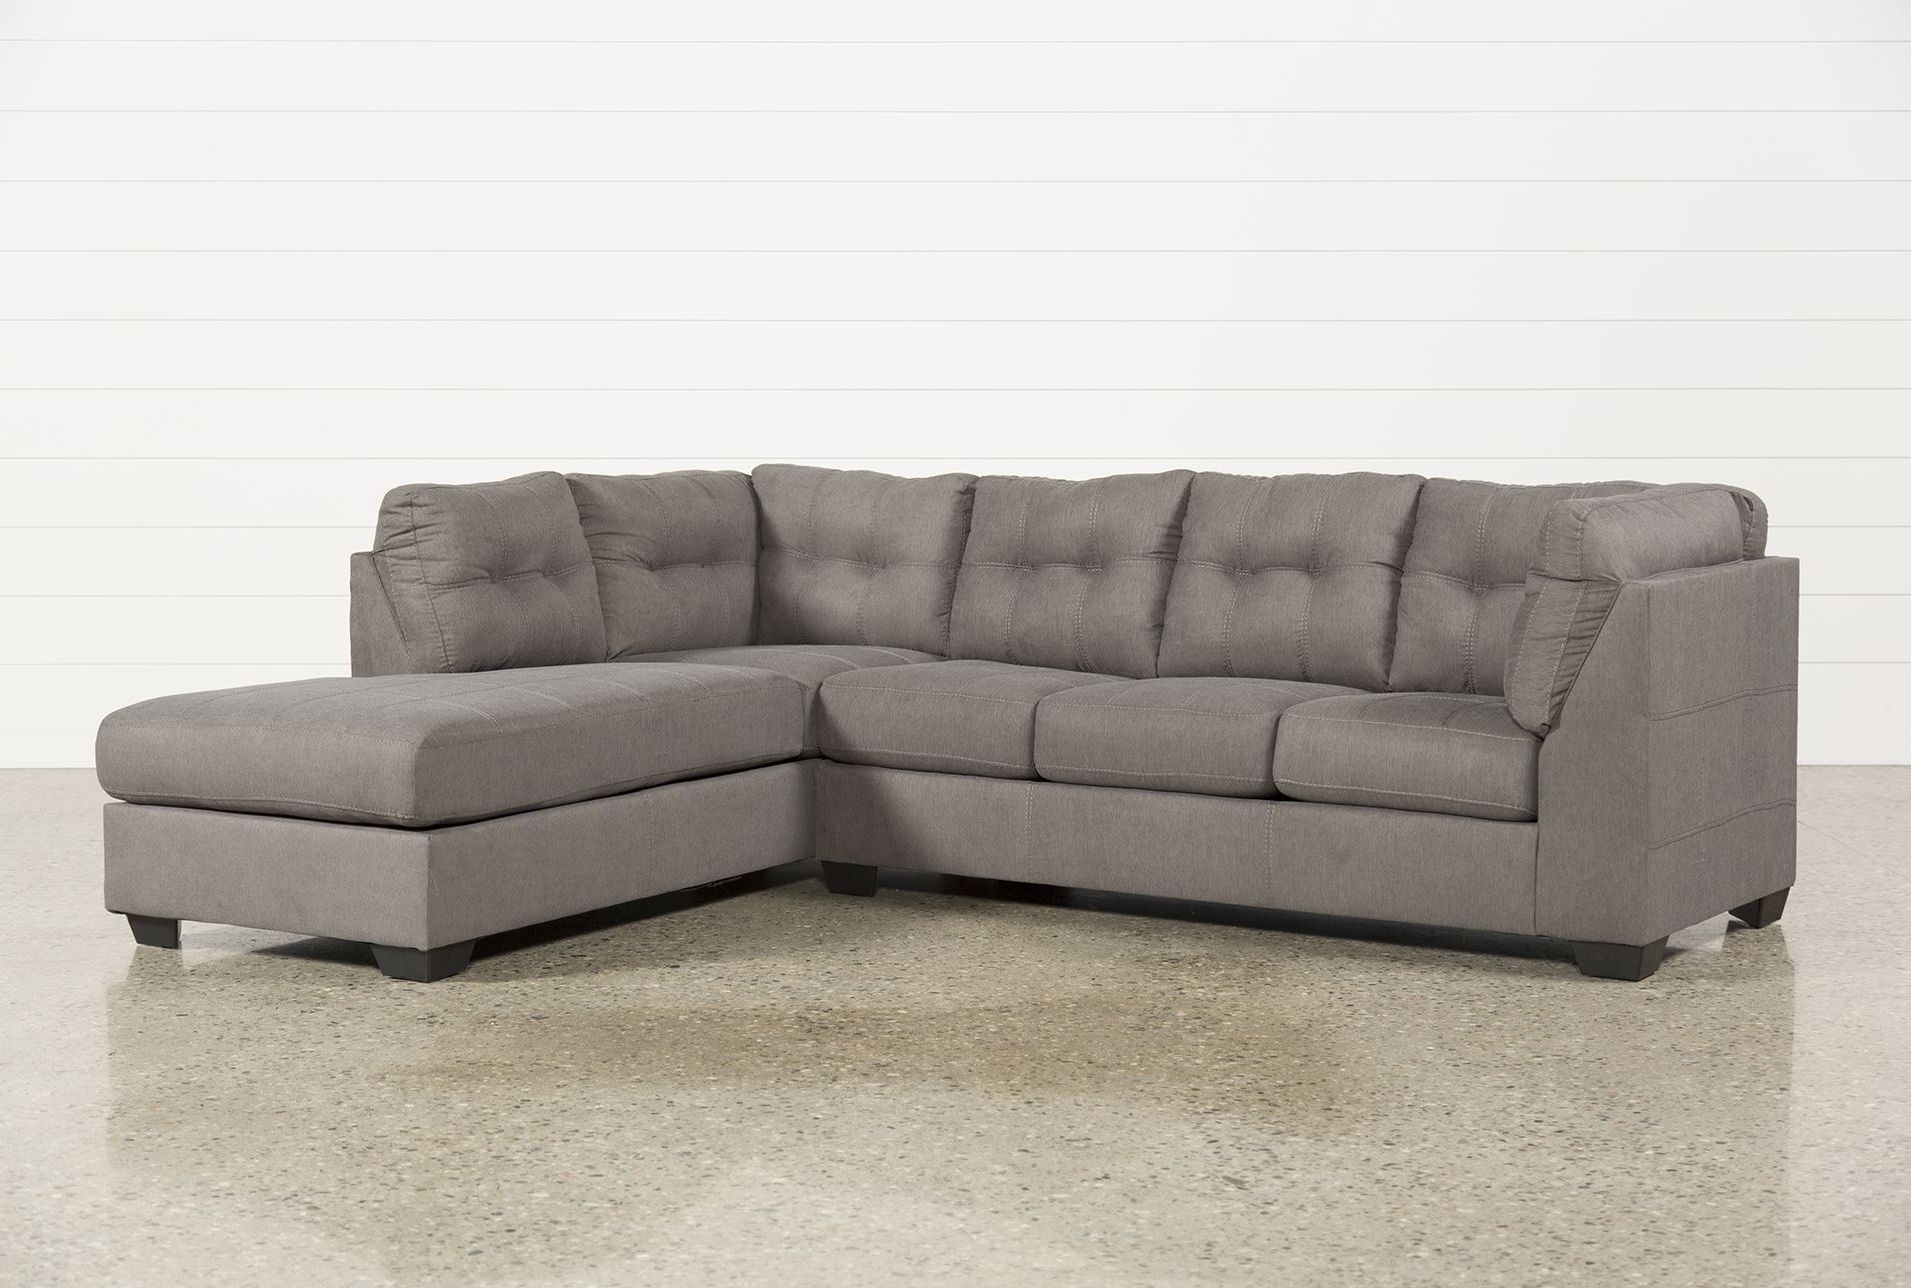 Well Liked Perfect Grey Sectional Sofa With Chaise 18 On Sofas And Couches Regarding Couches With Chaise (View 5 of 15)